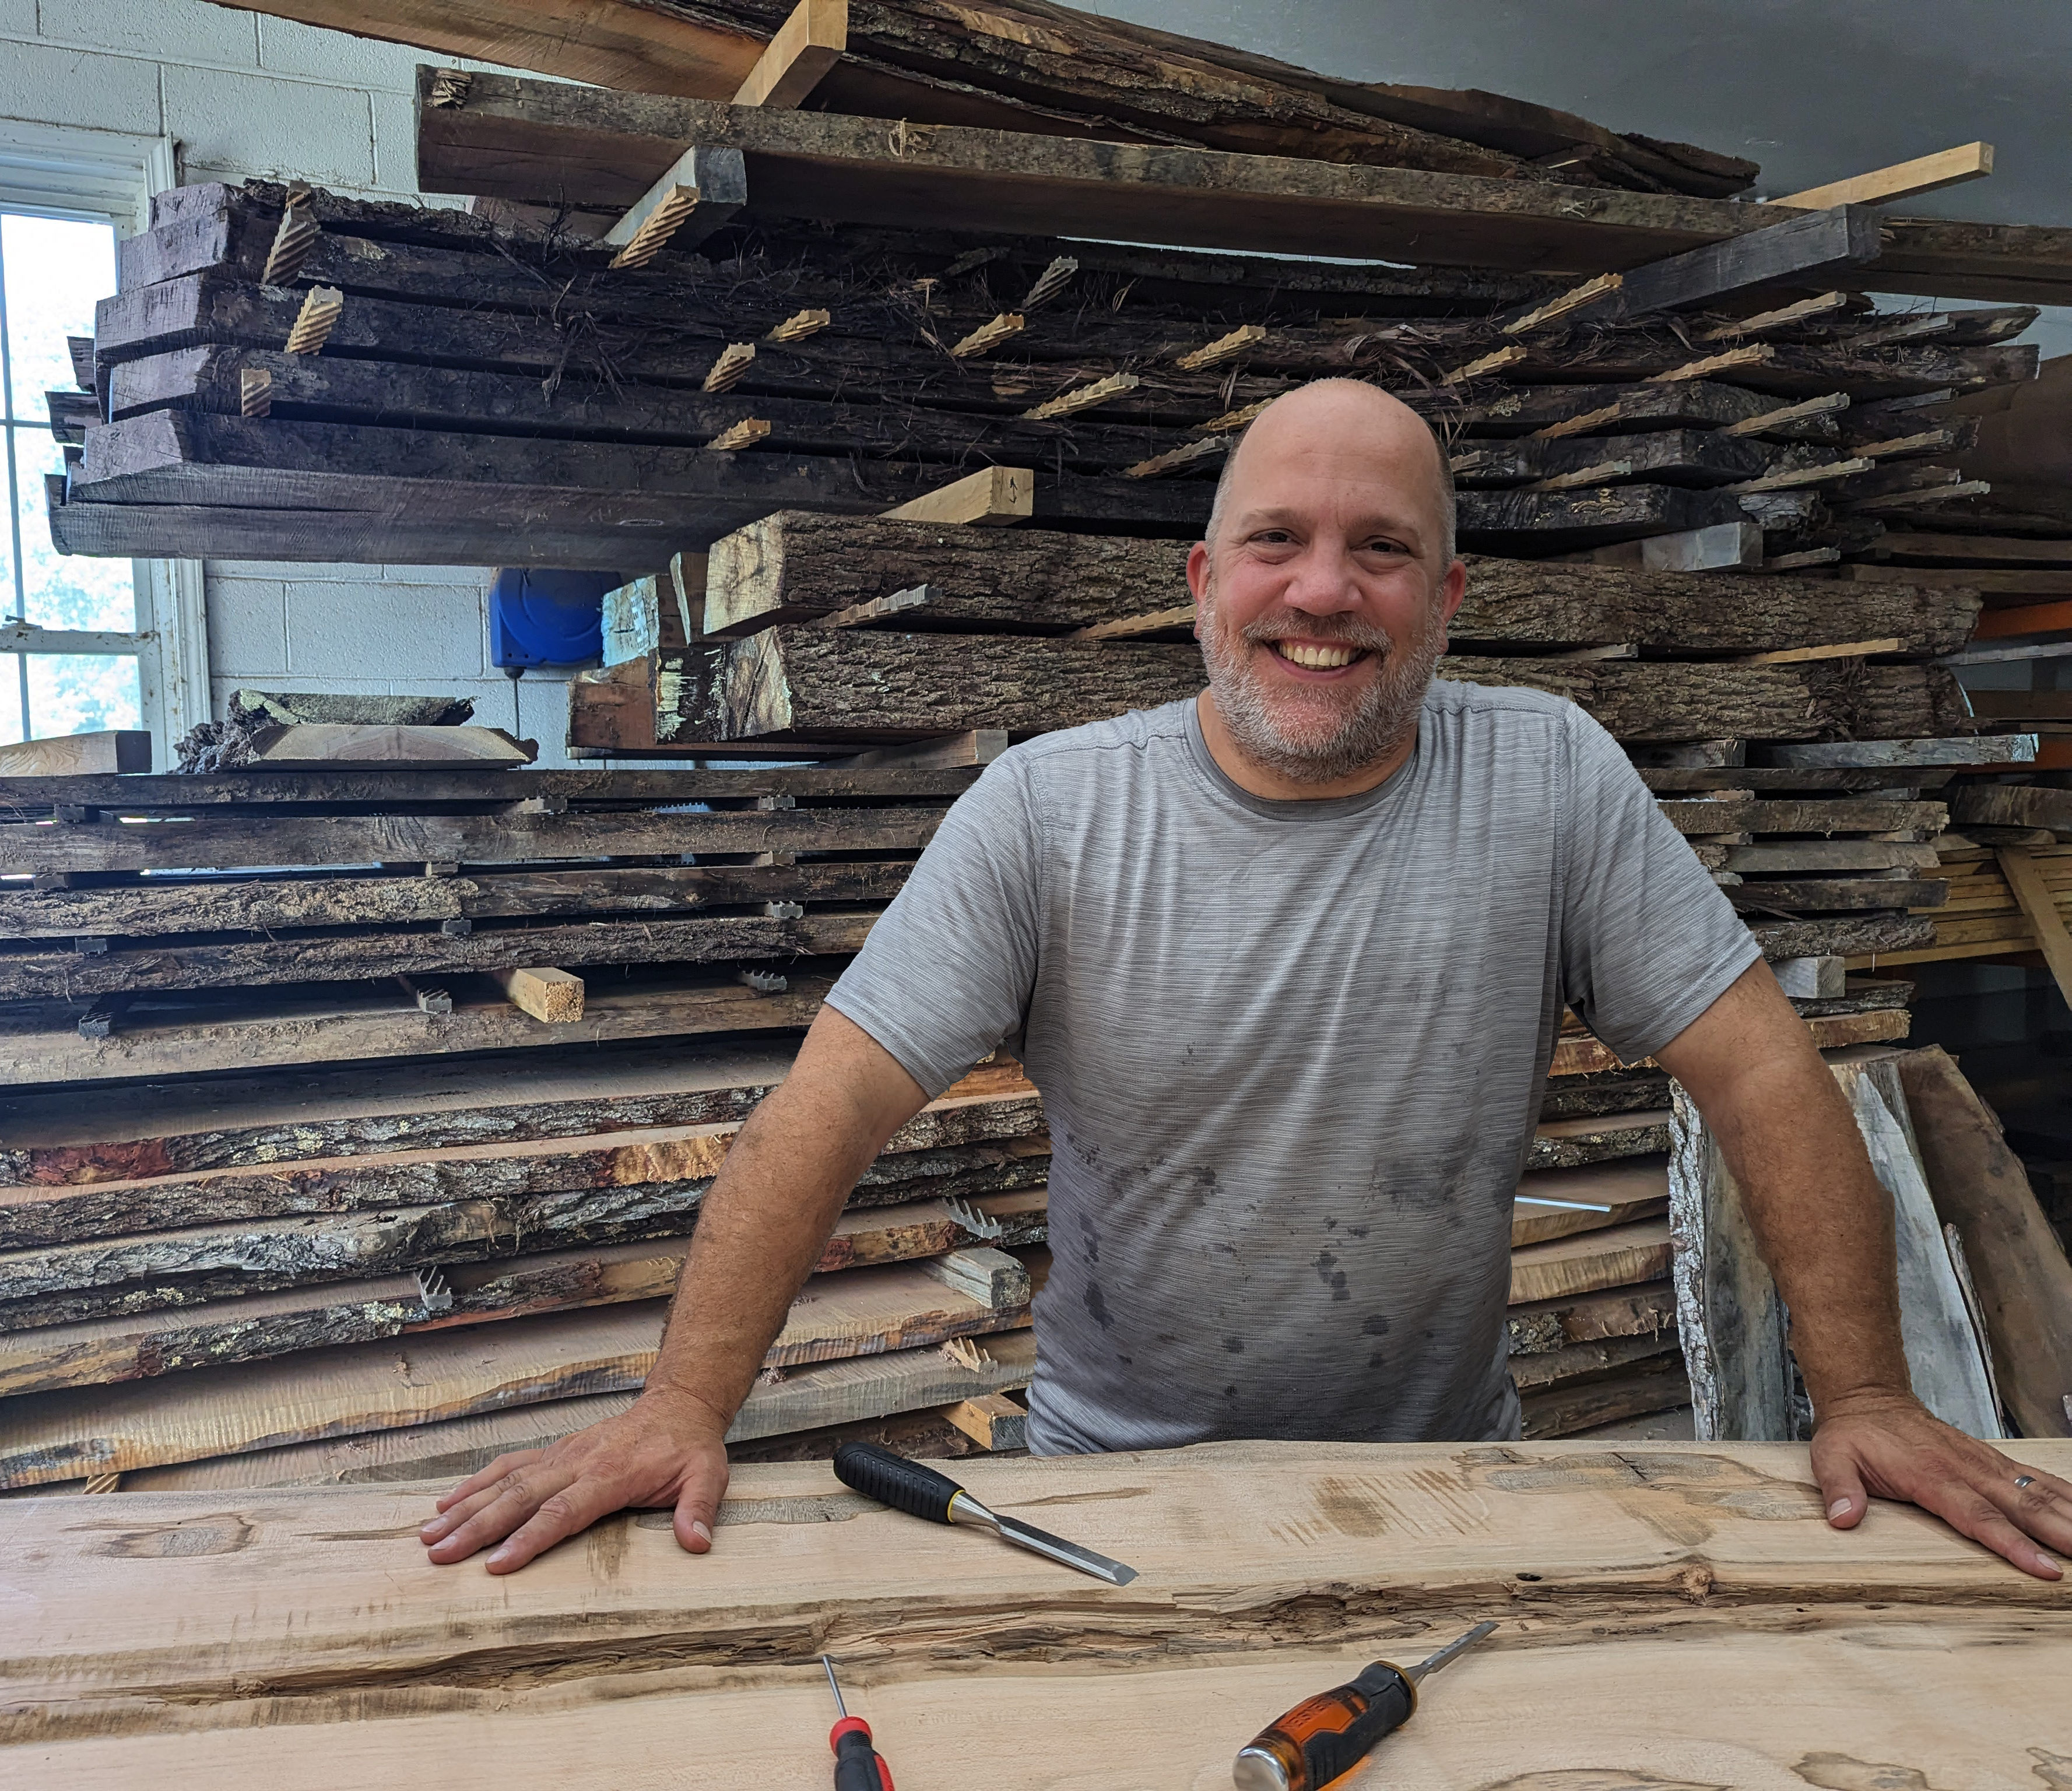 Owner Andy Peck leaning on his work bench in front of a wall of wood slats ready for prodction.